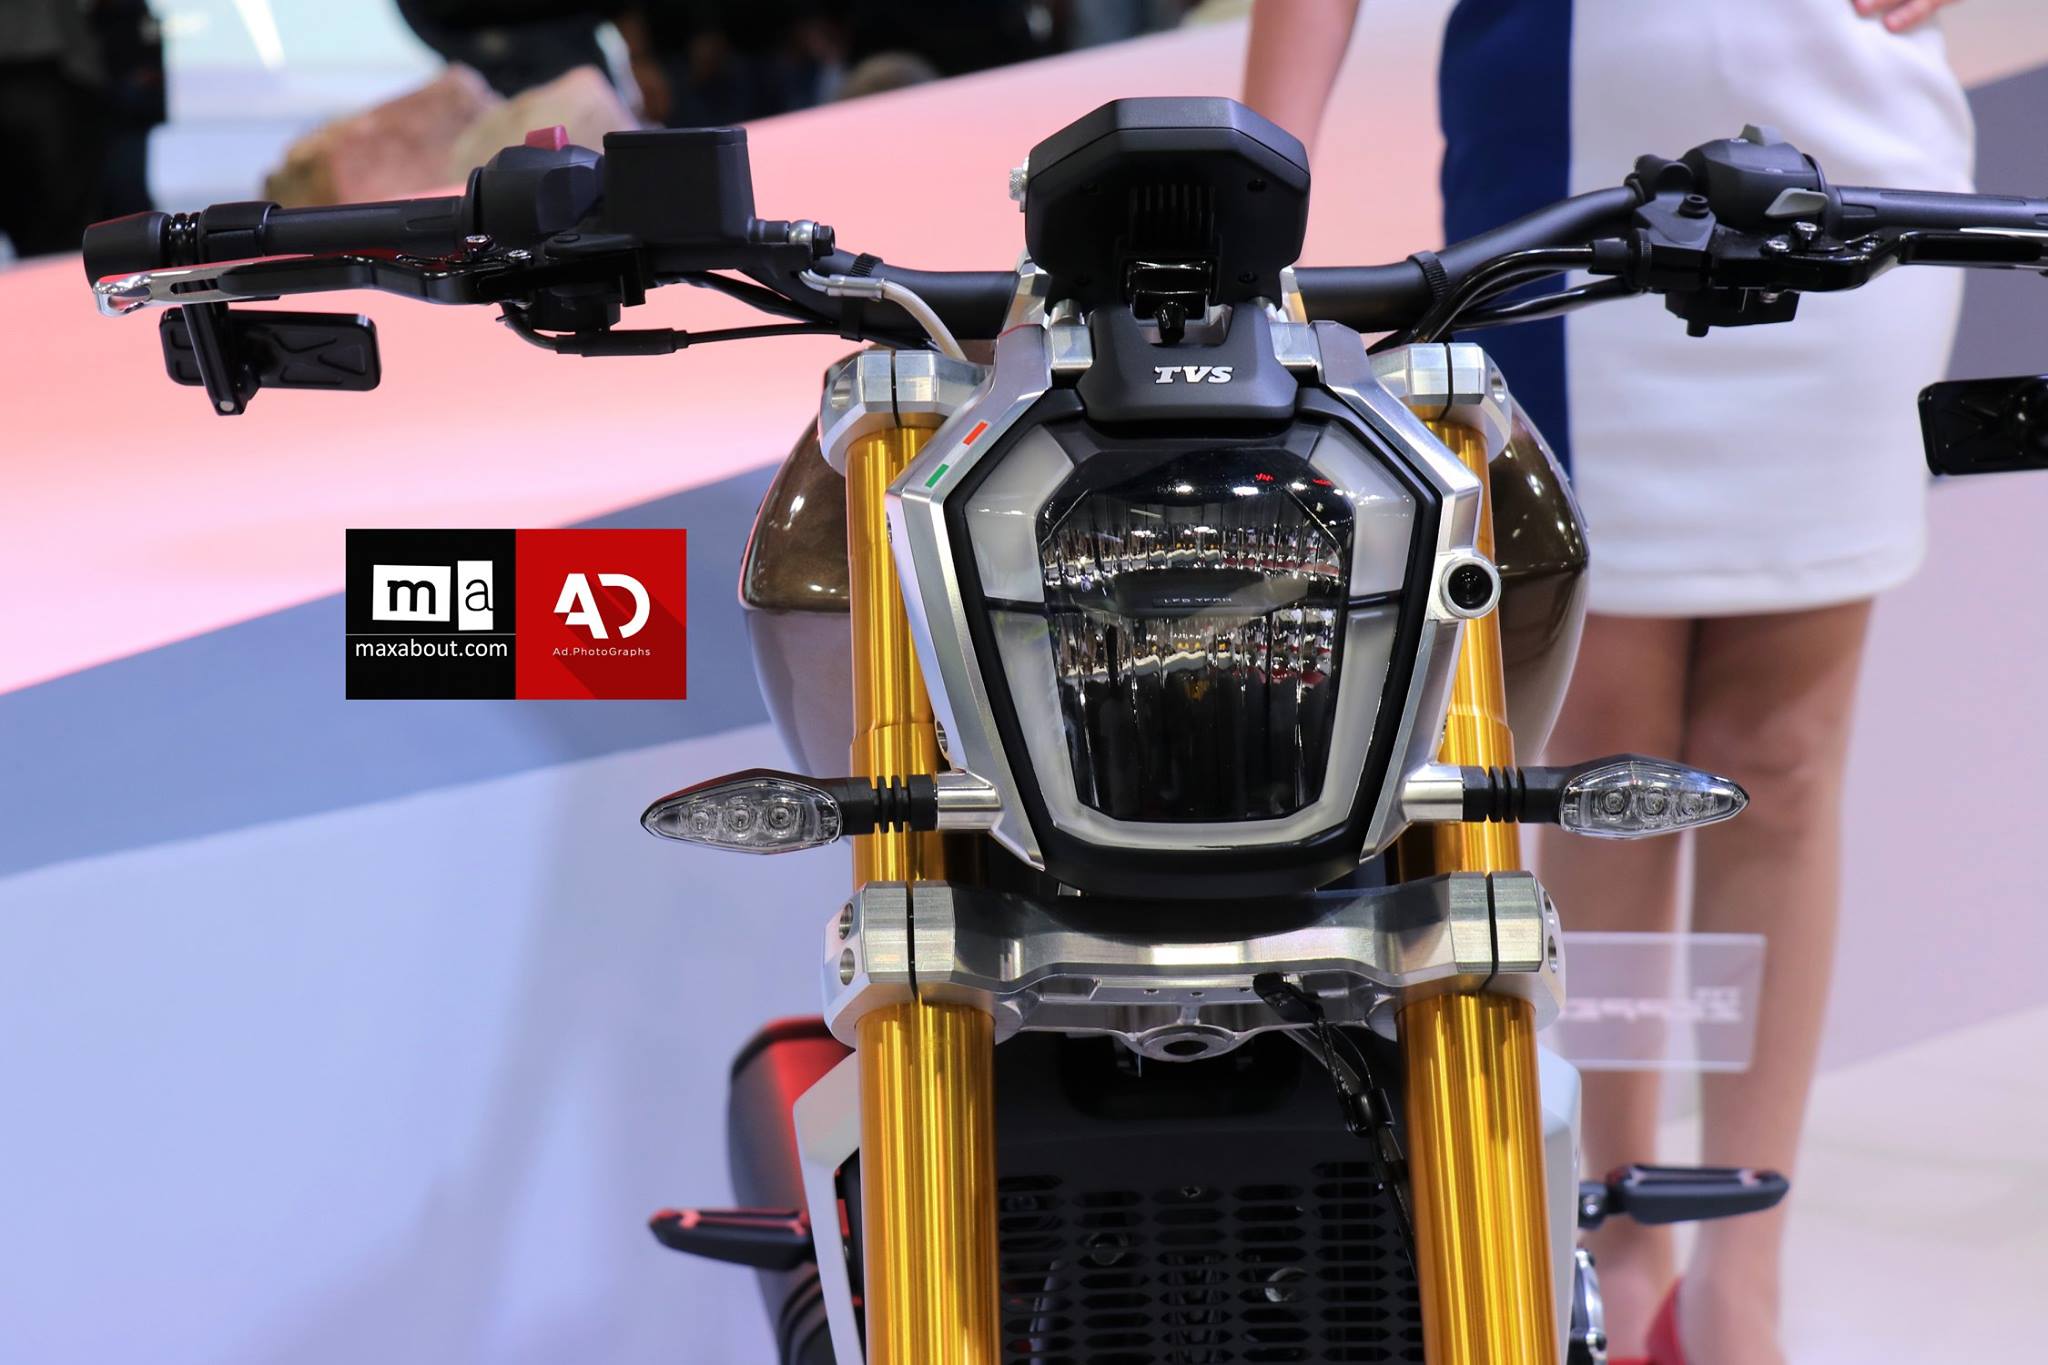 5 Quick Facts About the Upcoming TVS Cruiser Motorcycle - top